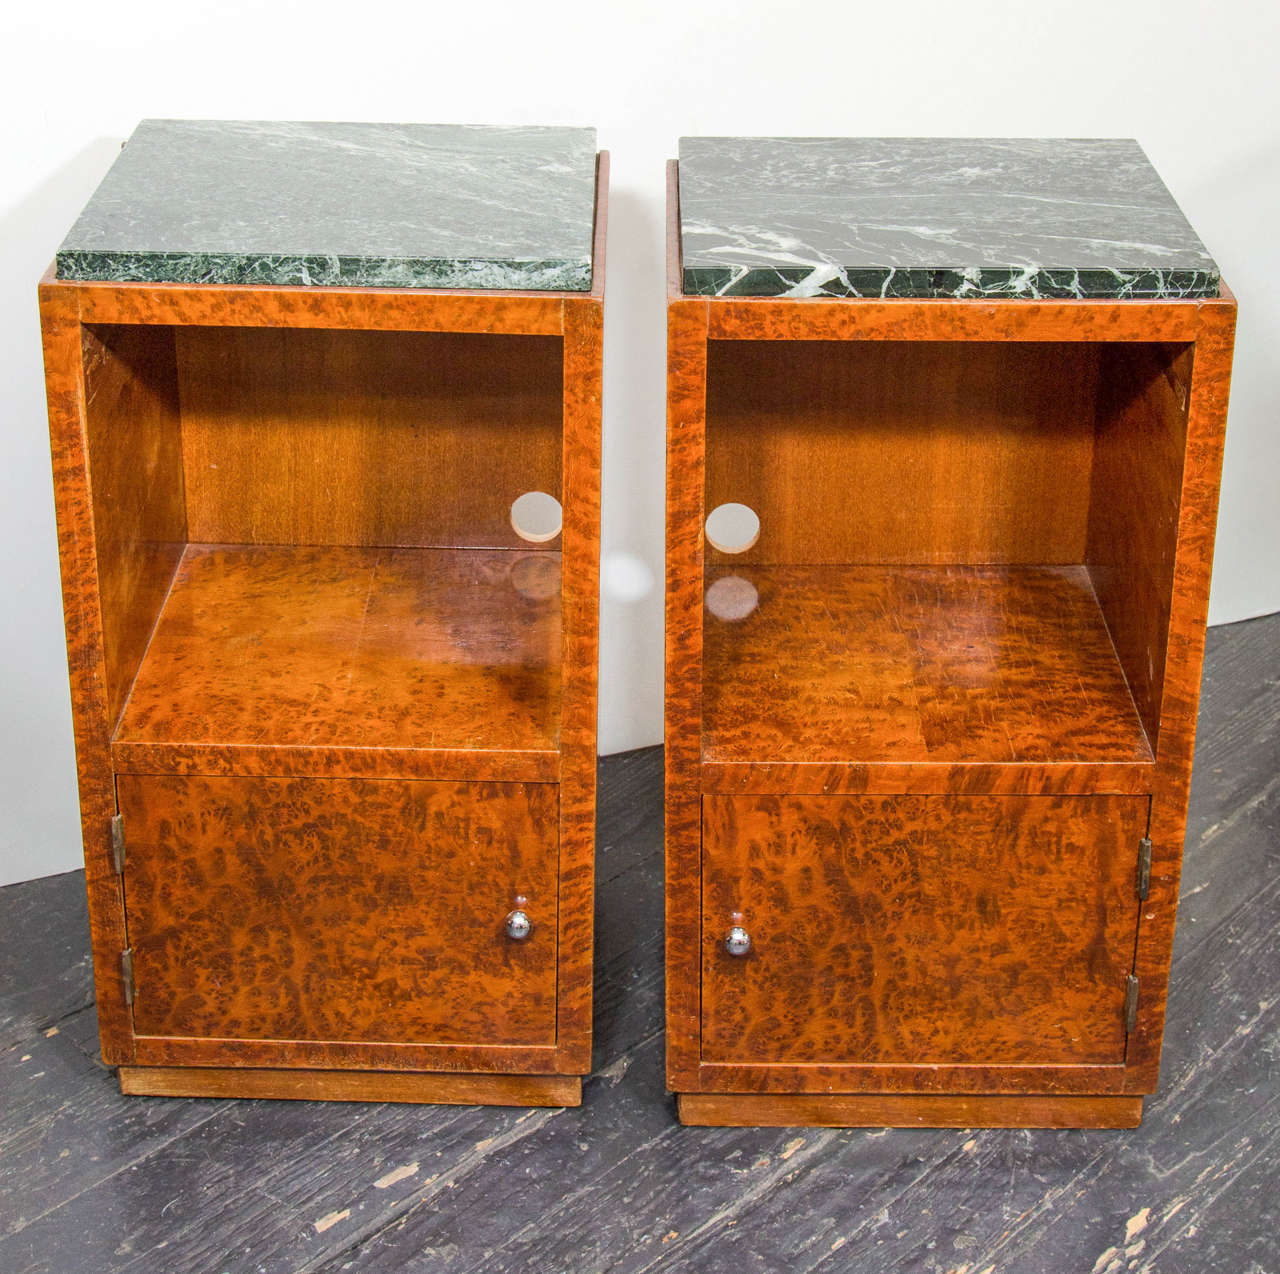 Handsome pair of olive burl nightstands, topped with green marble. Please contact for location.